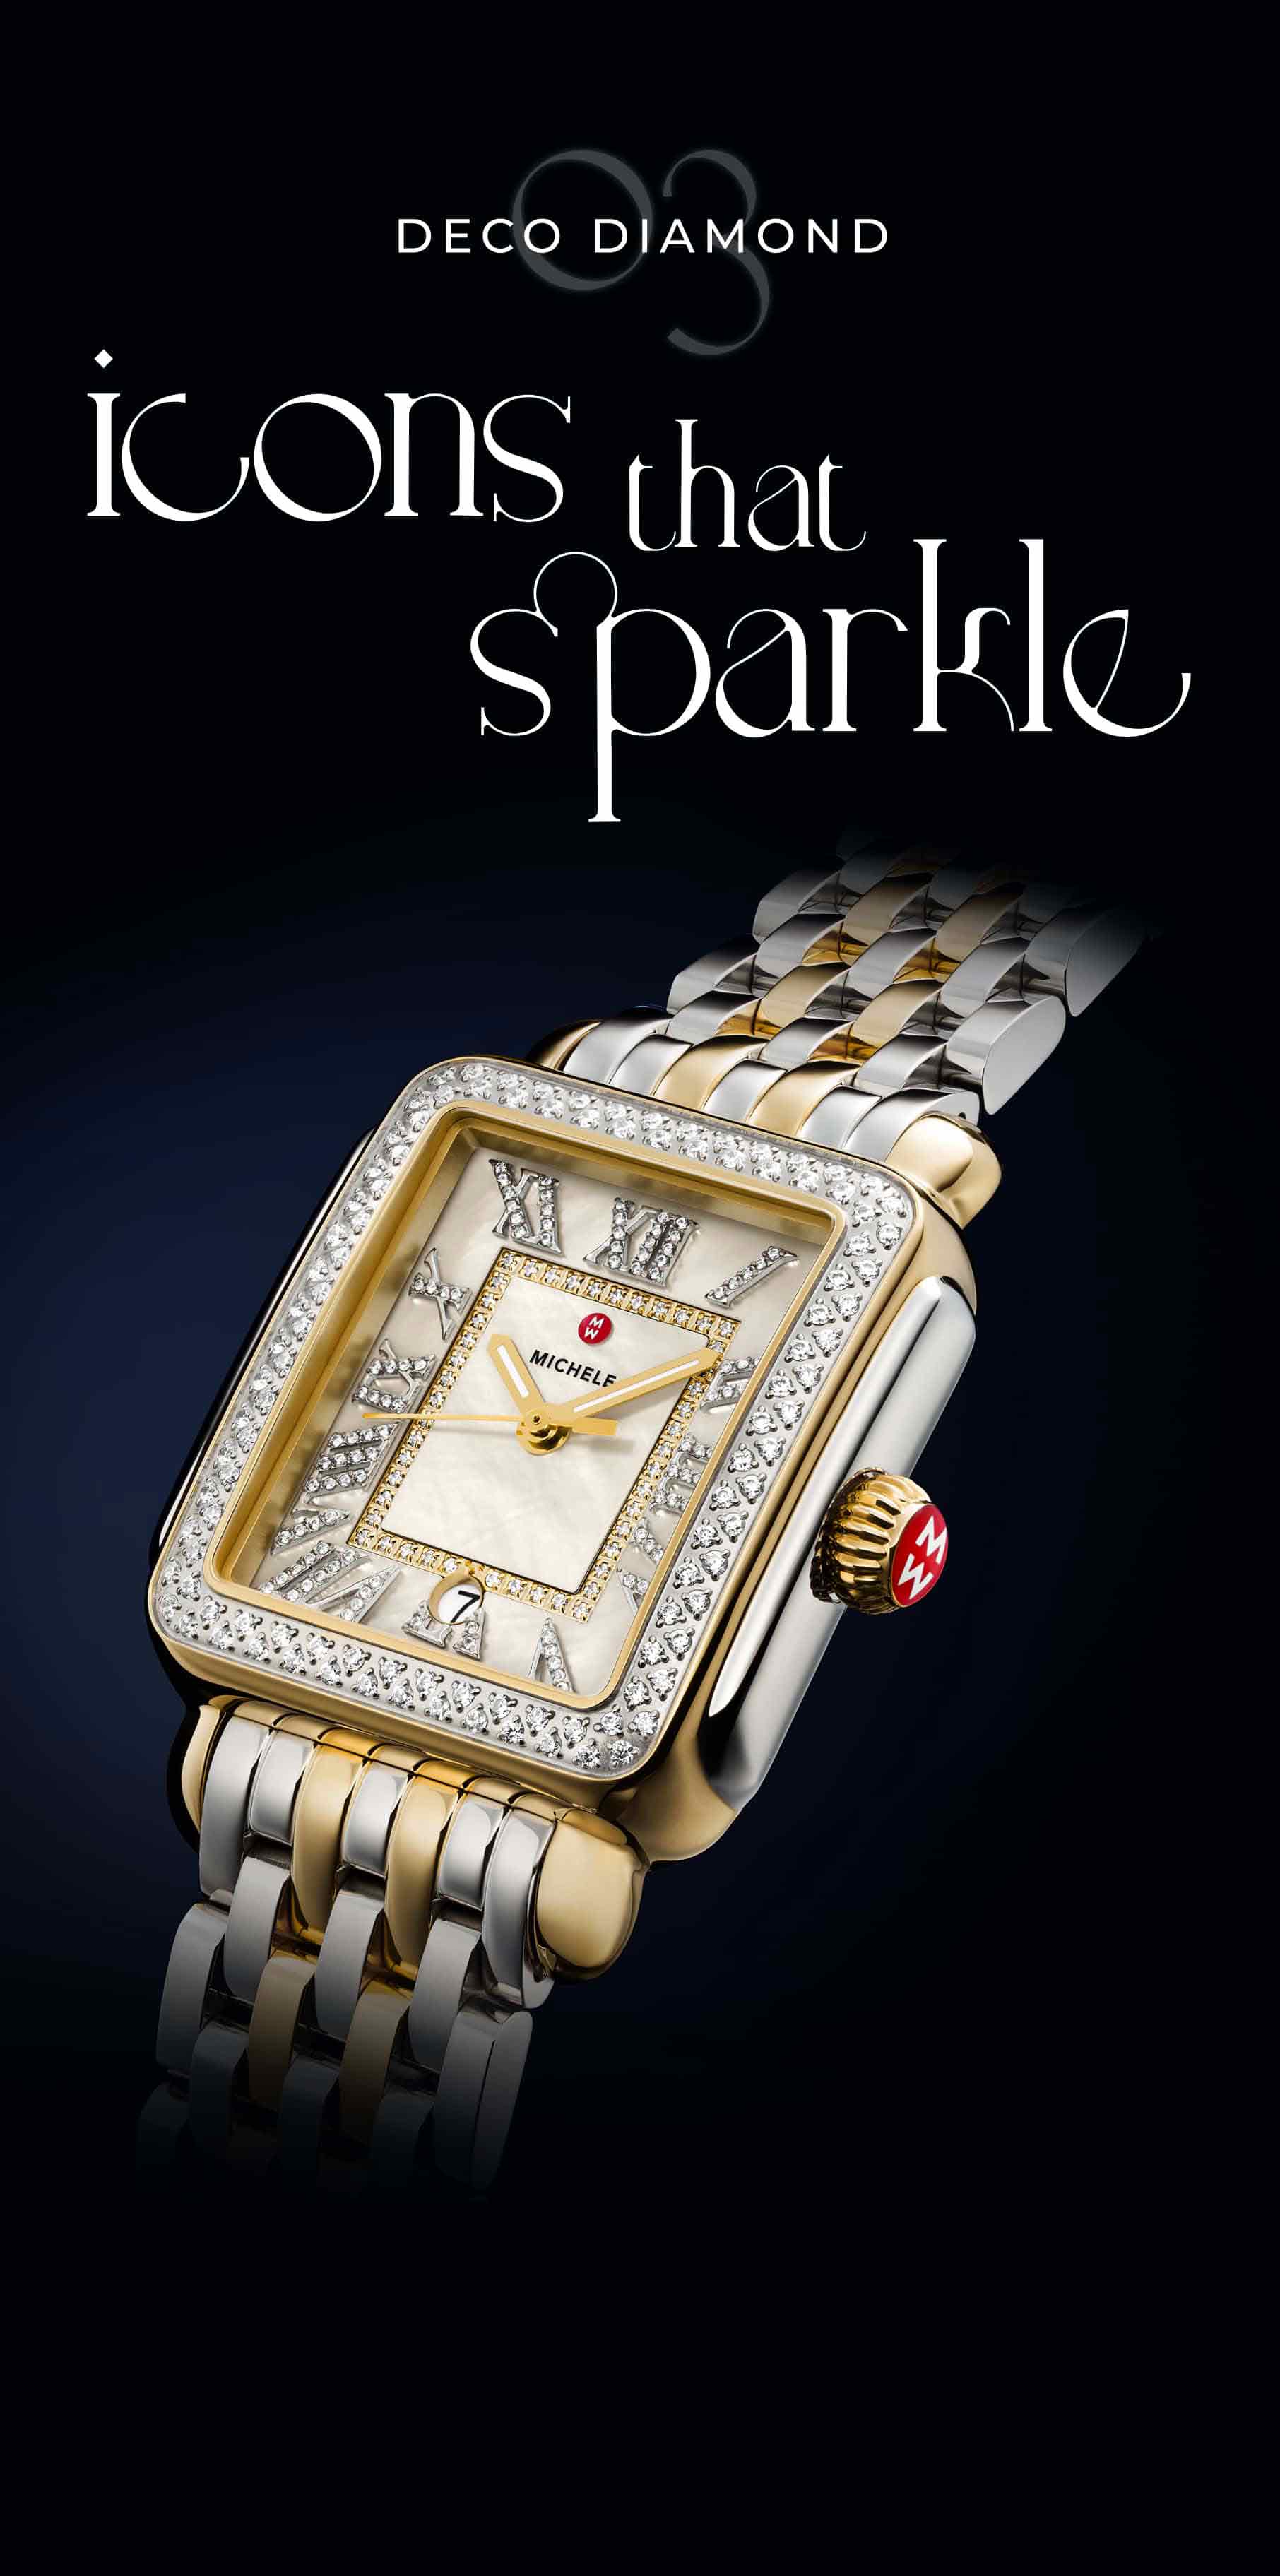 Deco Diamond two-tone watch with pave Roman numerals